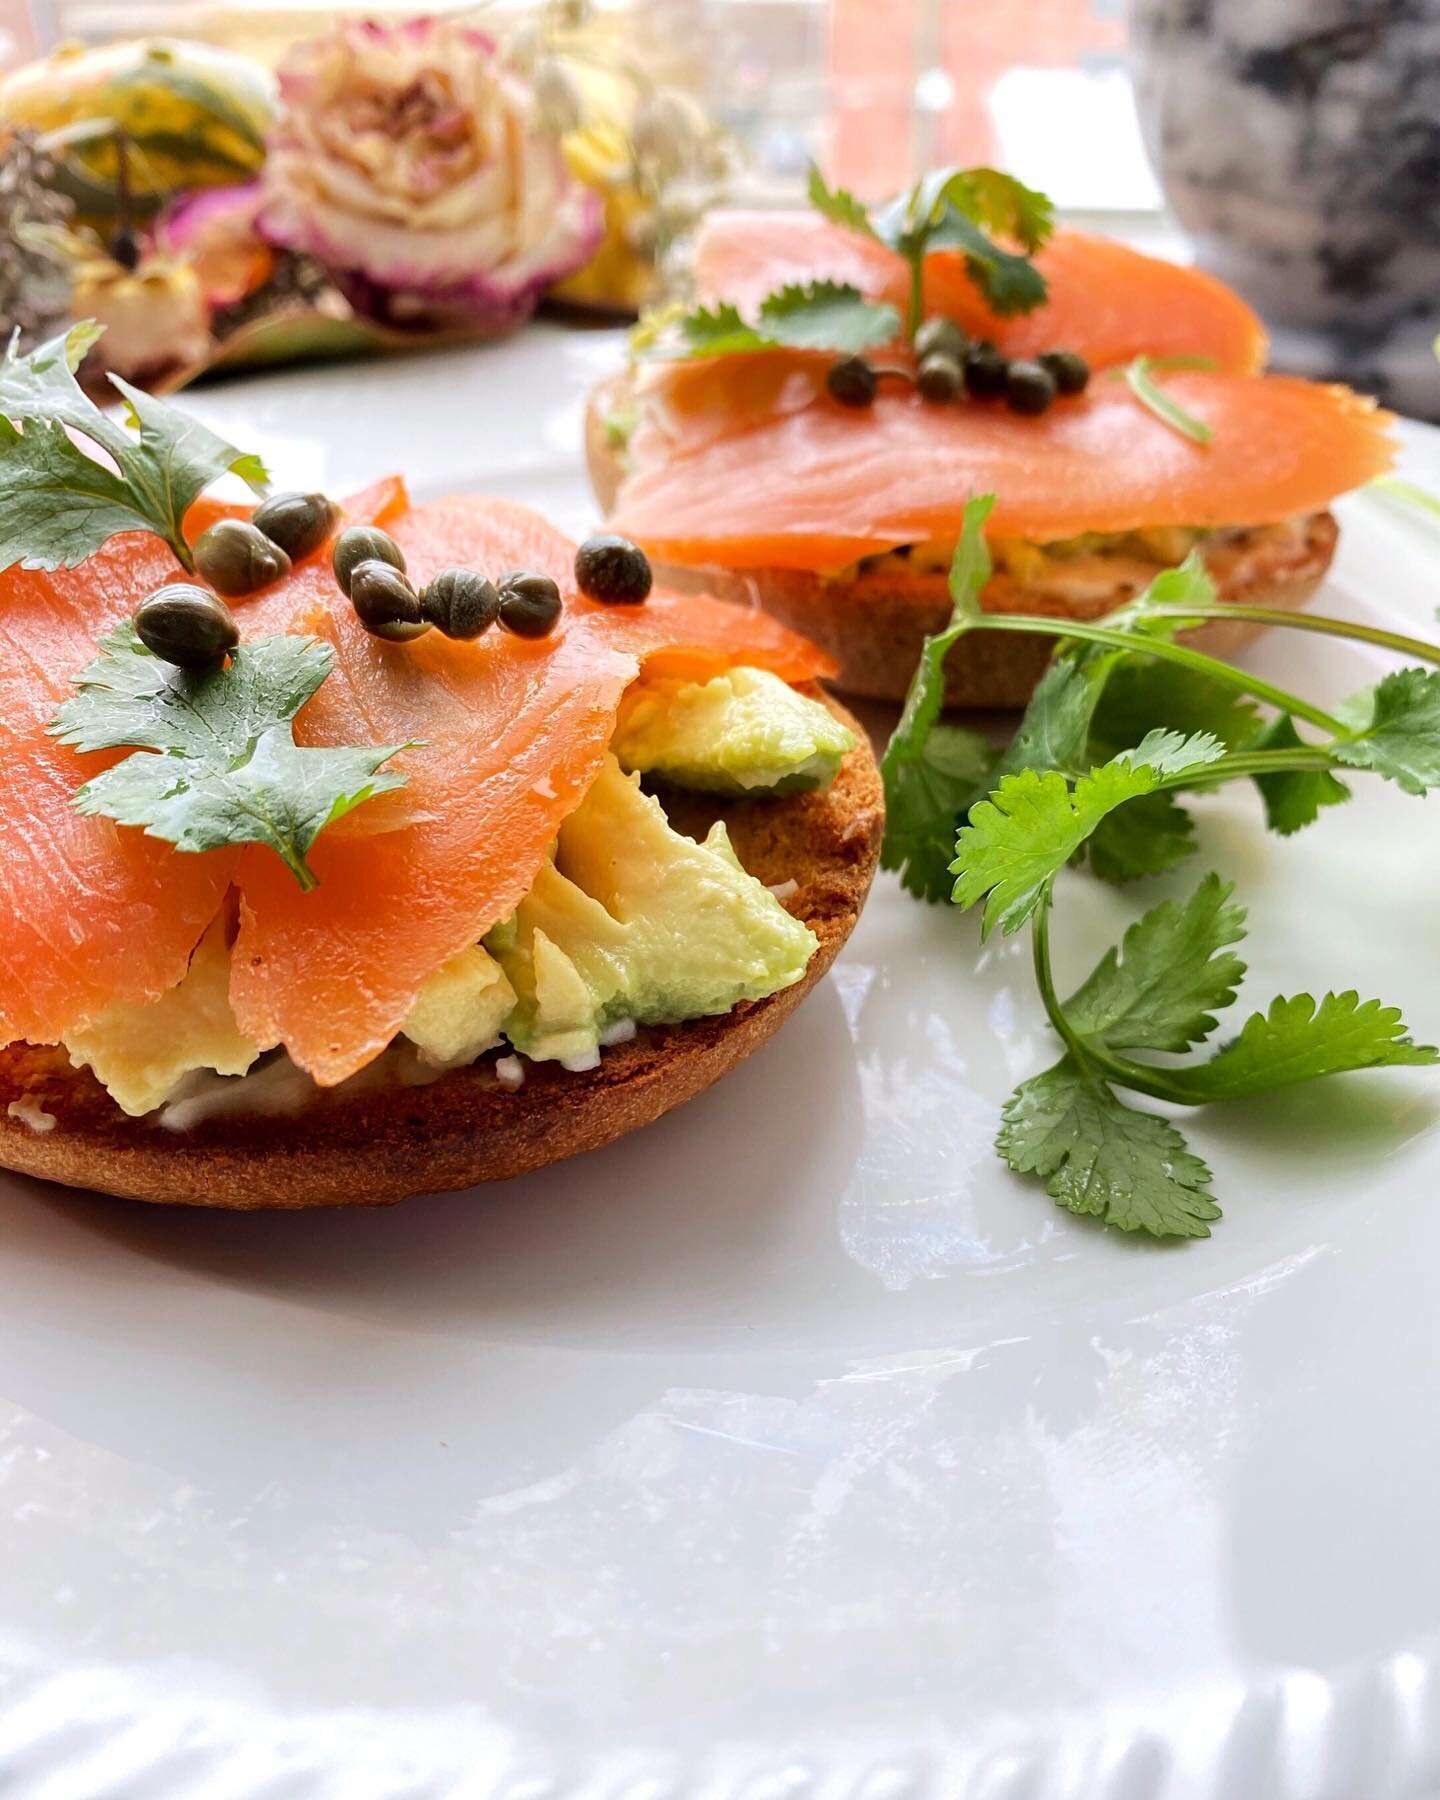 lox + avo bagel sandwich🥯
⁣
This is essentially my favorite sushi roll on a bagel💕 
⁣
But also ✋🏼 Why have I been paying too much money for lox bagels when it&rsquo;s way cheaper and super simple to make at home🙃
⁣
What&rsquo;s in this one?
🥯GF 